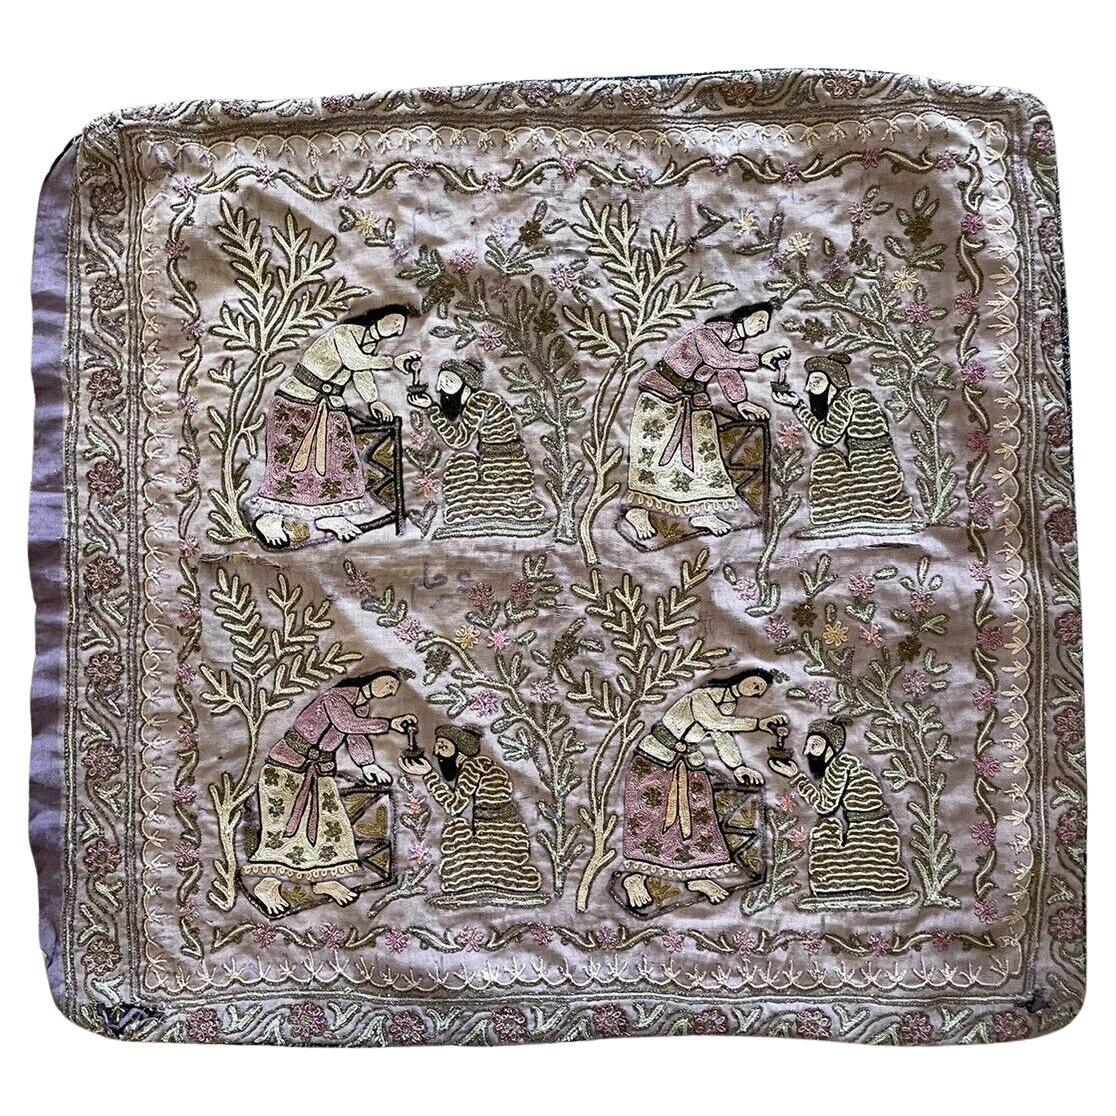 Handmade Antique Chinese Silk Collectible Embroidery 1.2' x 1.3', 1880s - 1N19 For Sale